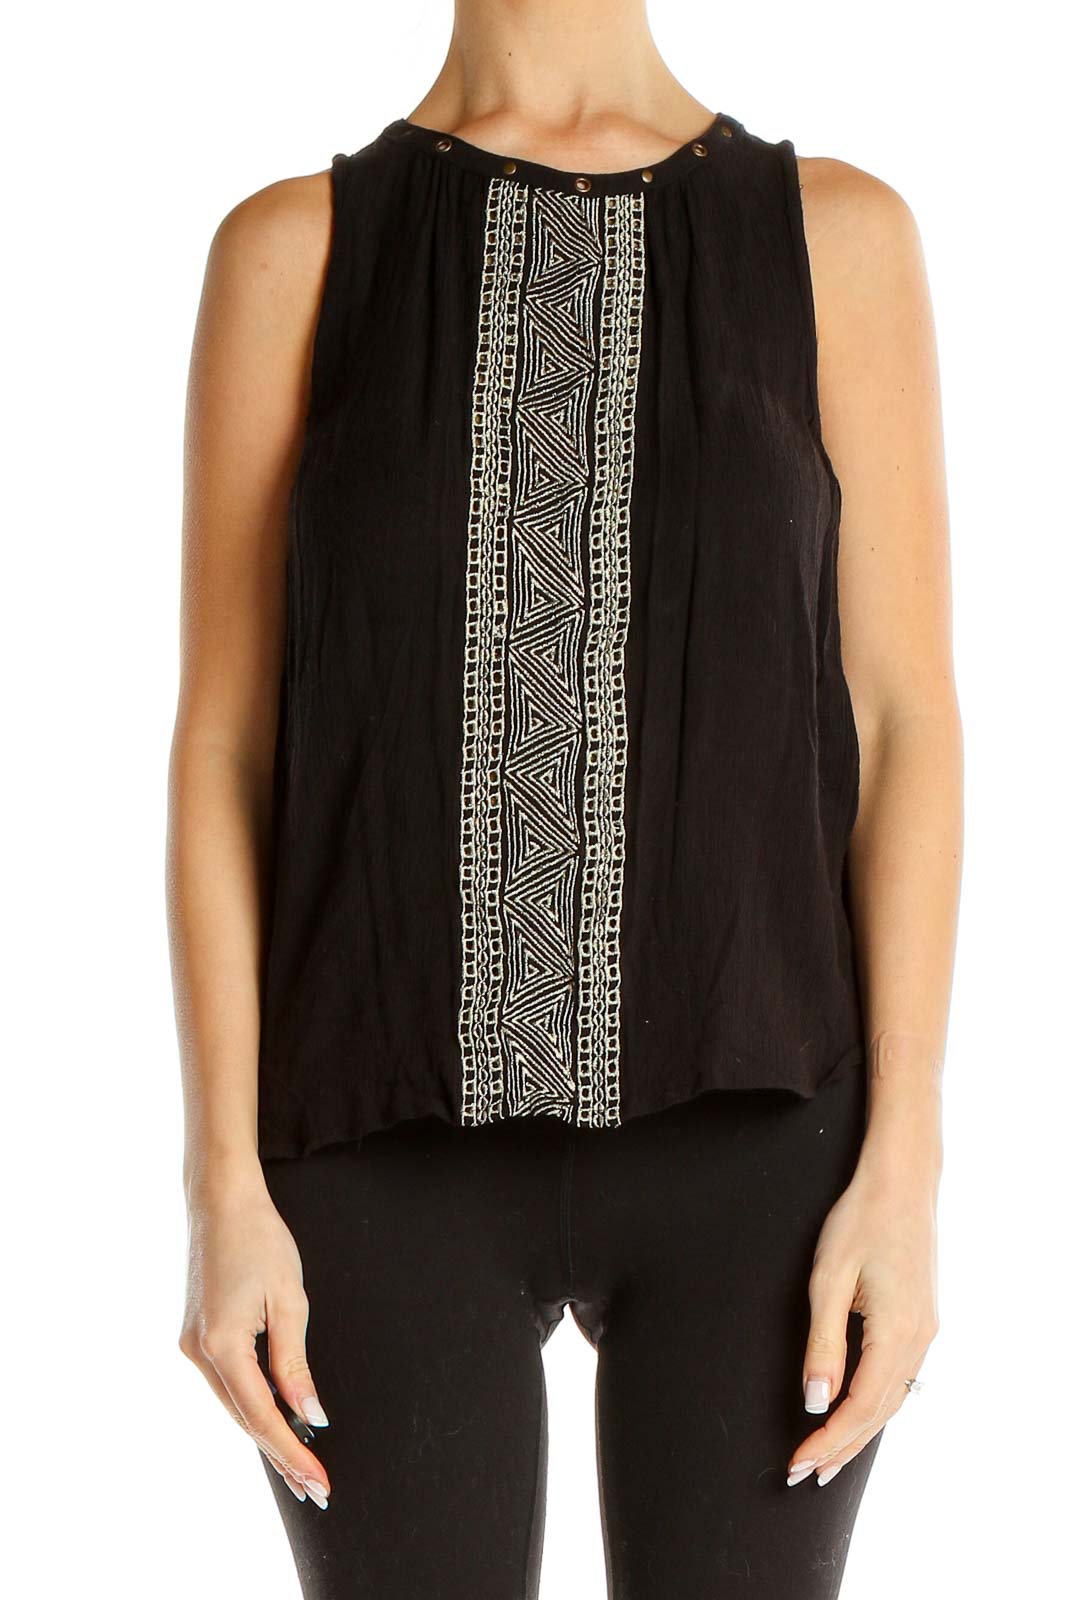 Black Aztec Embroidered Bohemian Tank Top Front